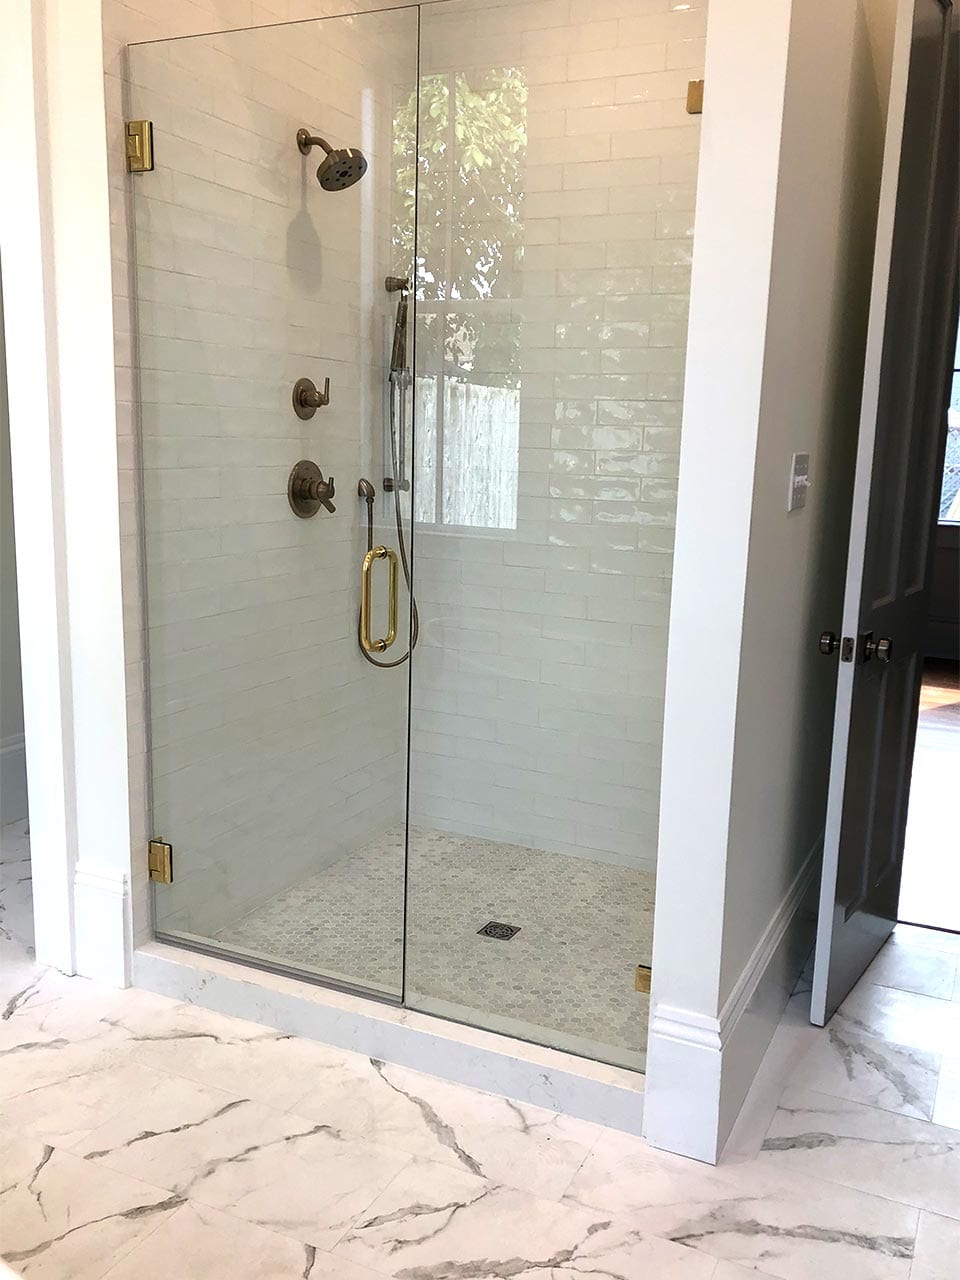 Glass shower enclosure installed by Reliable Glass & Mirror